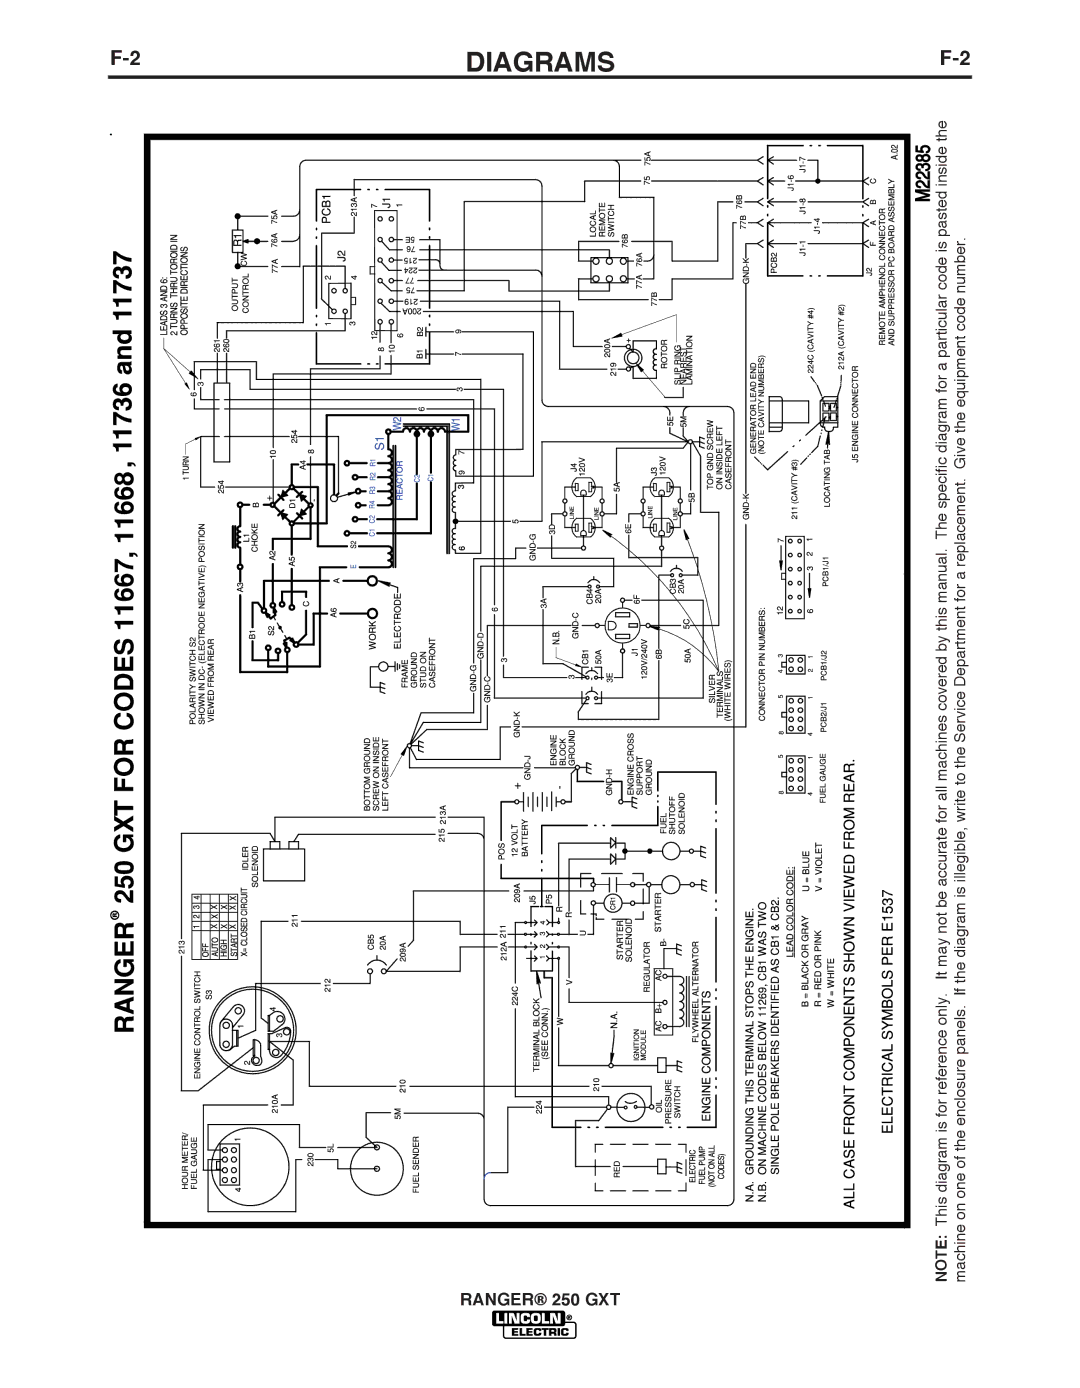 Lincoln Electric 250 GXT manual Diagrams 